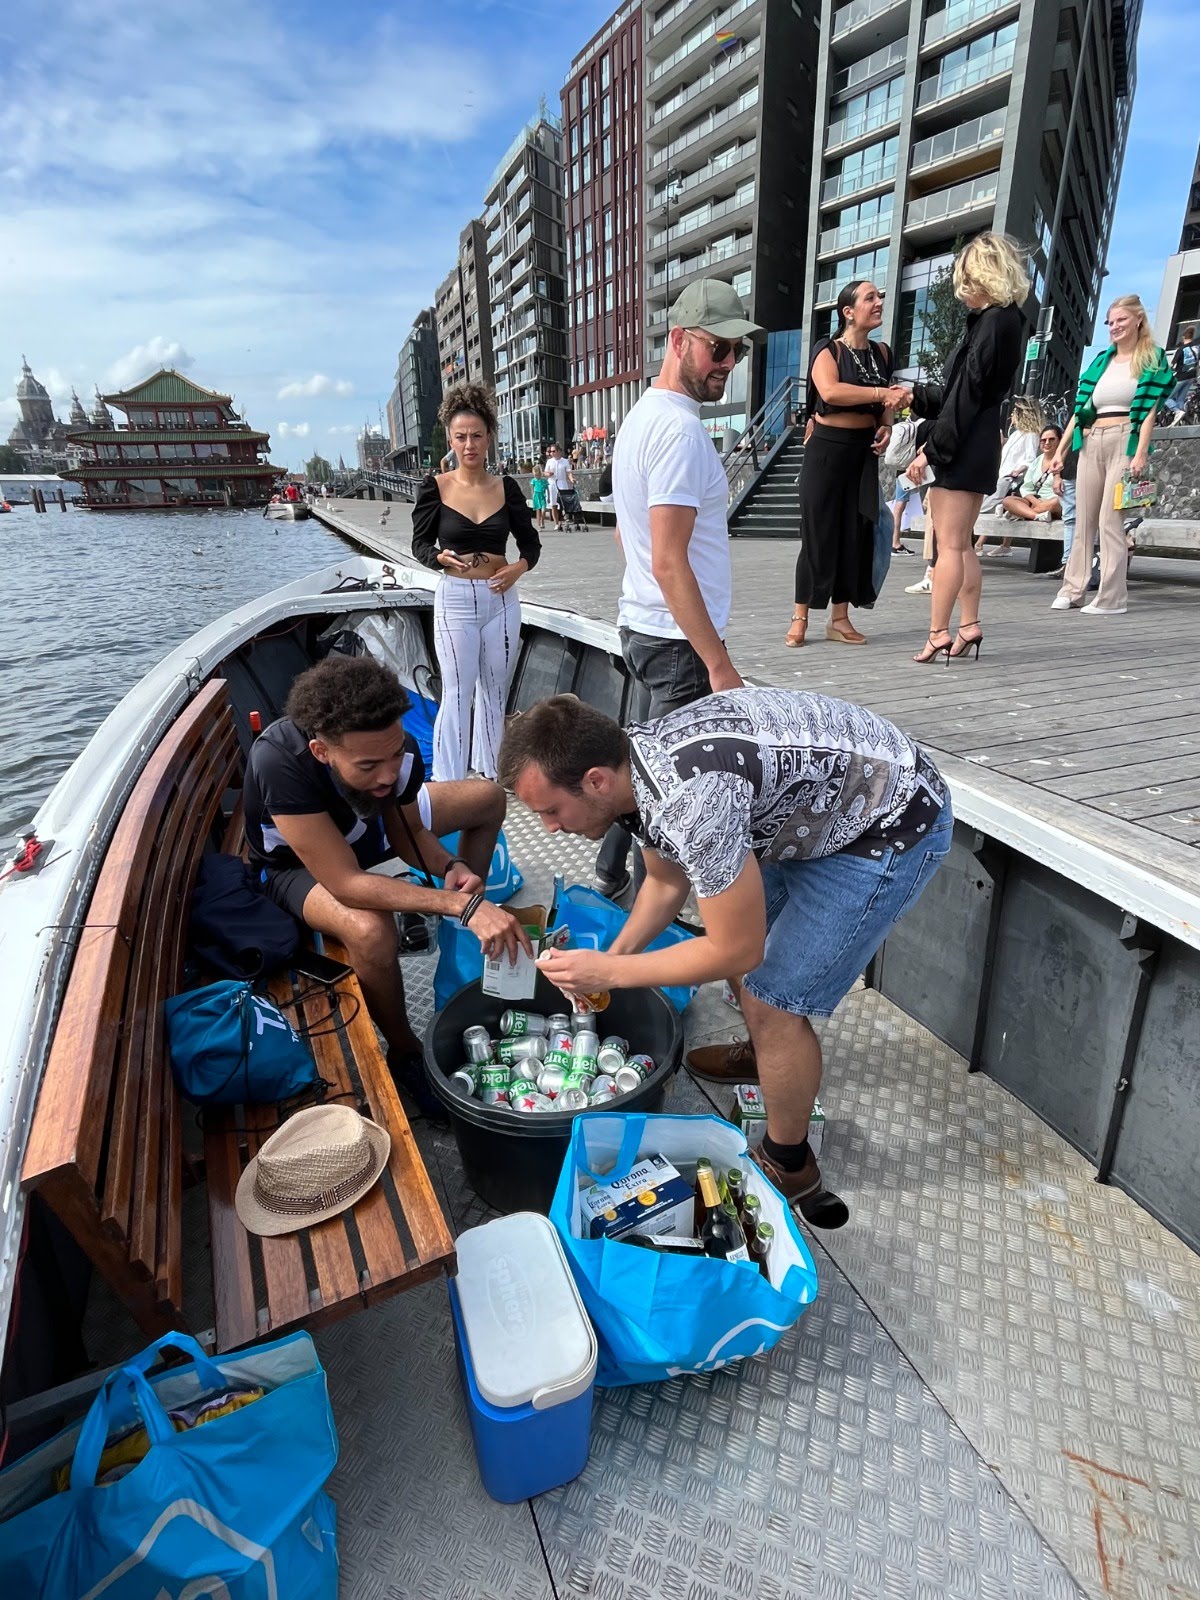 Passengers preparing for a canal boat tour in Amsterdam, stocking up on refreshments against a backdrop of modern riverside architecture and the Sea Palace floating restaurant.